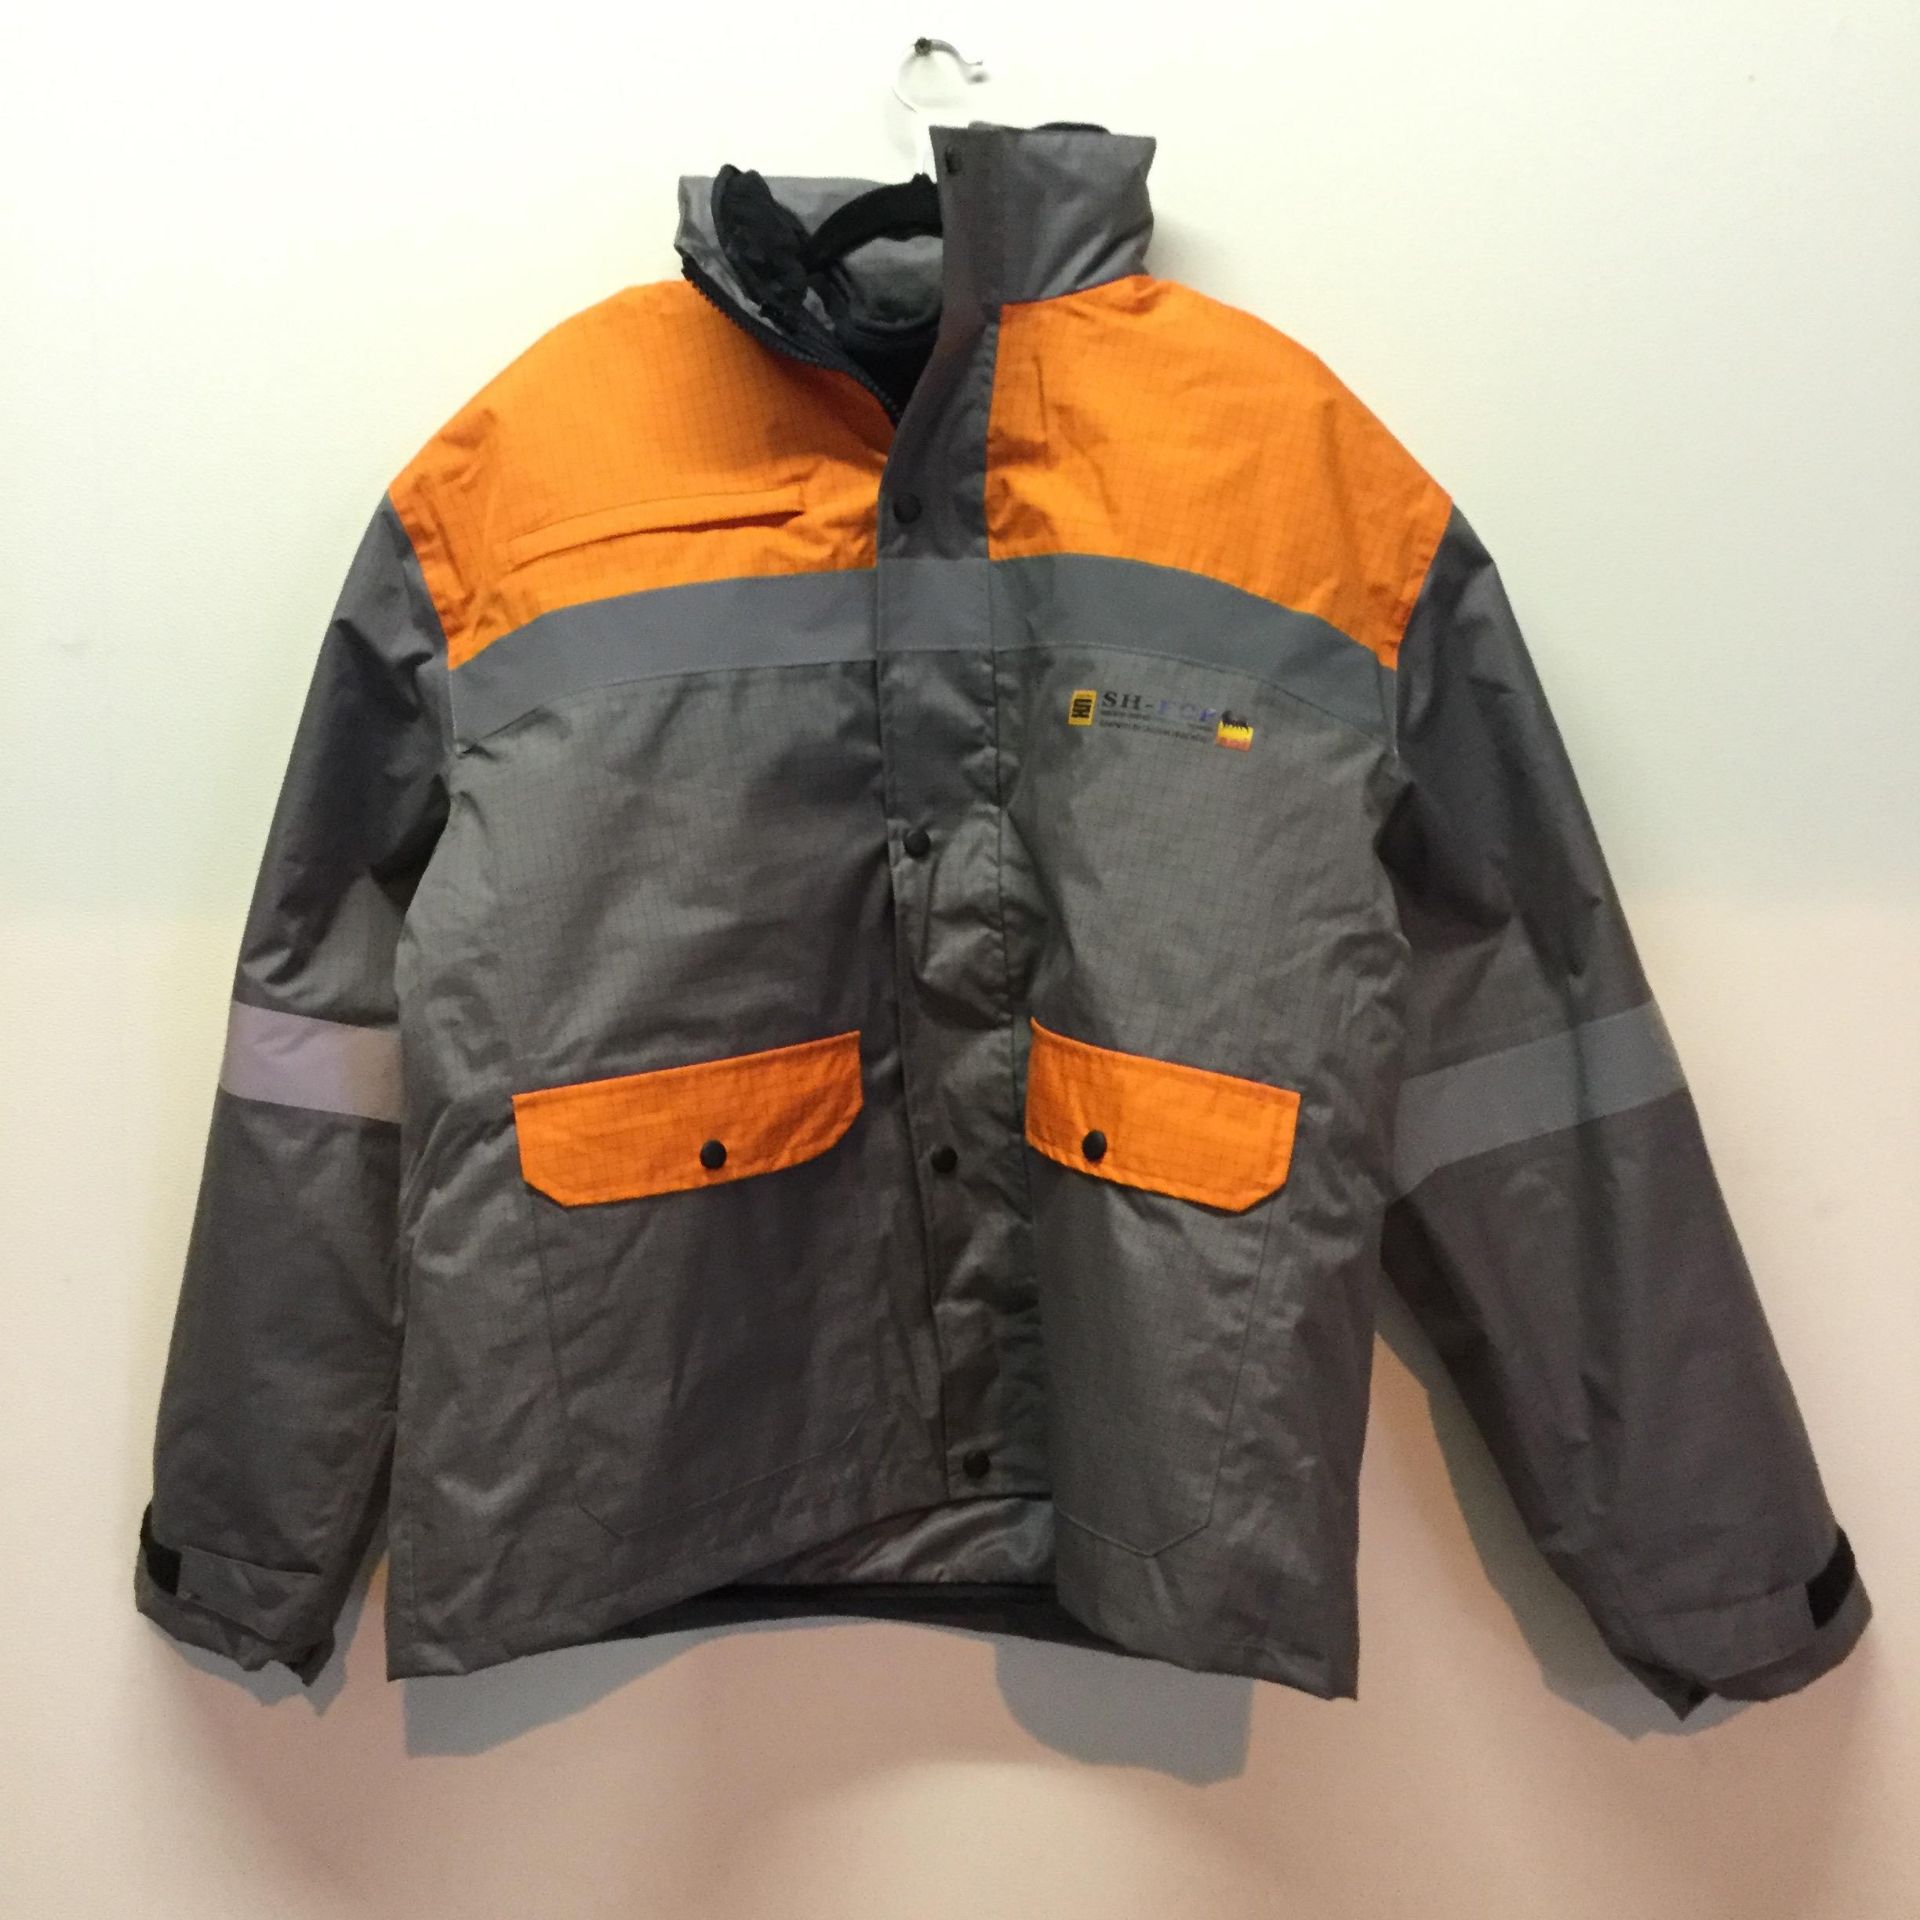 All Weather 3 layer Gortex Antistatic waterproof Jackets- Size 56